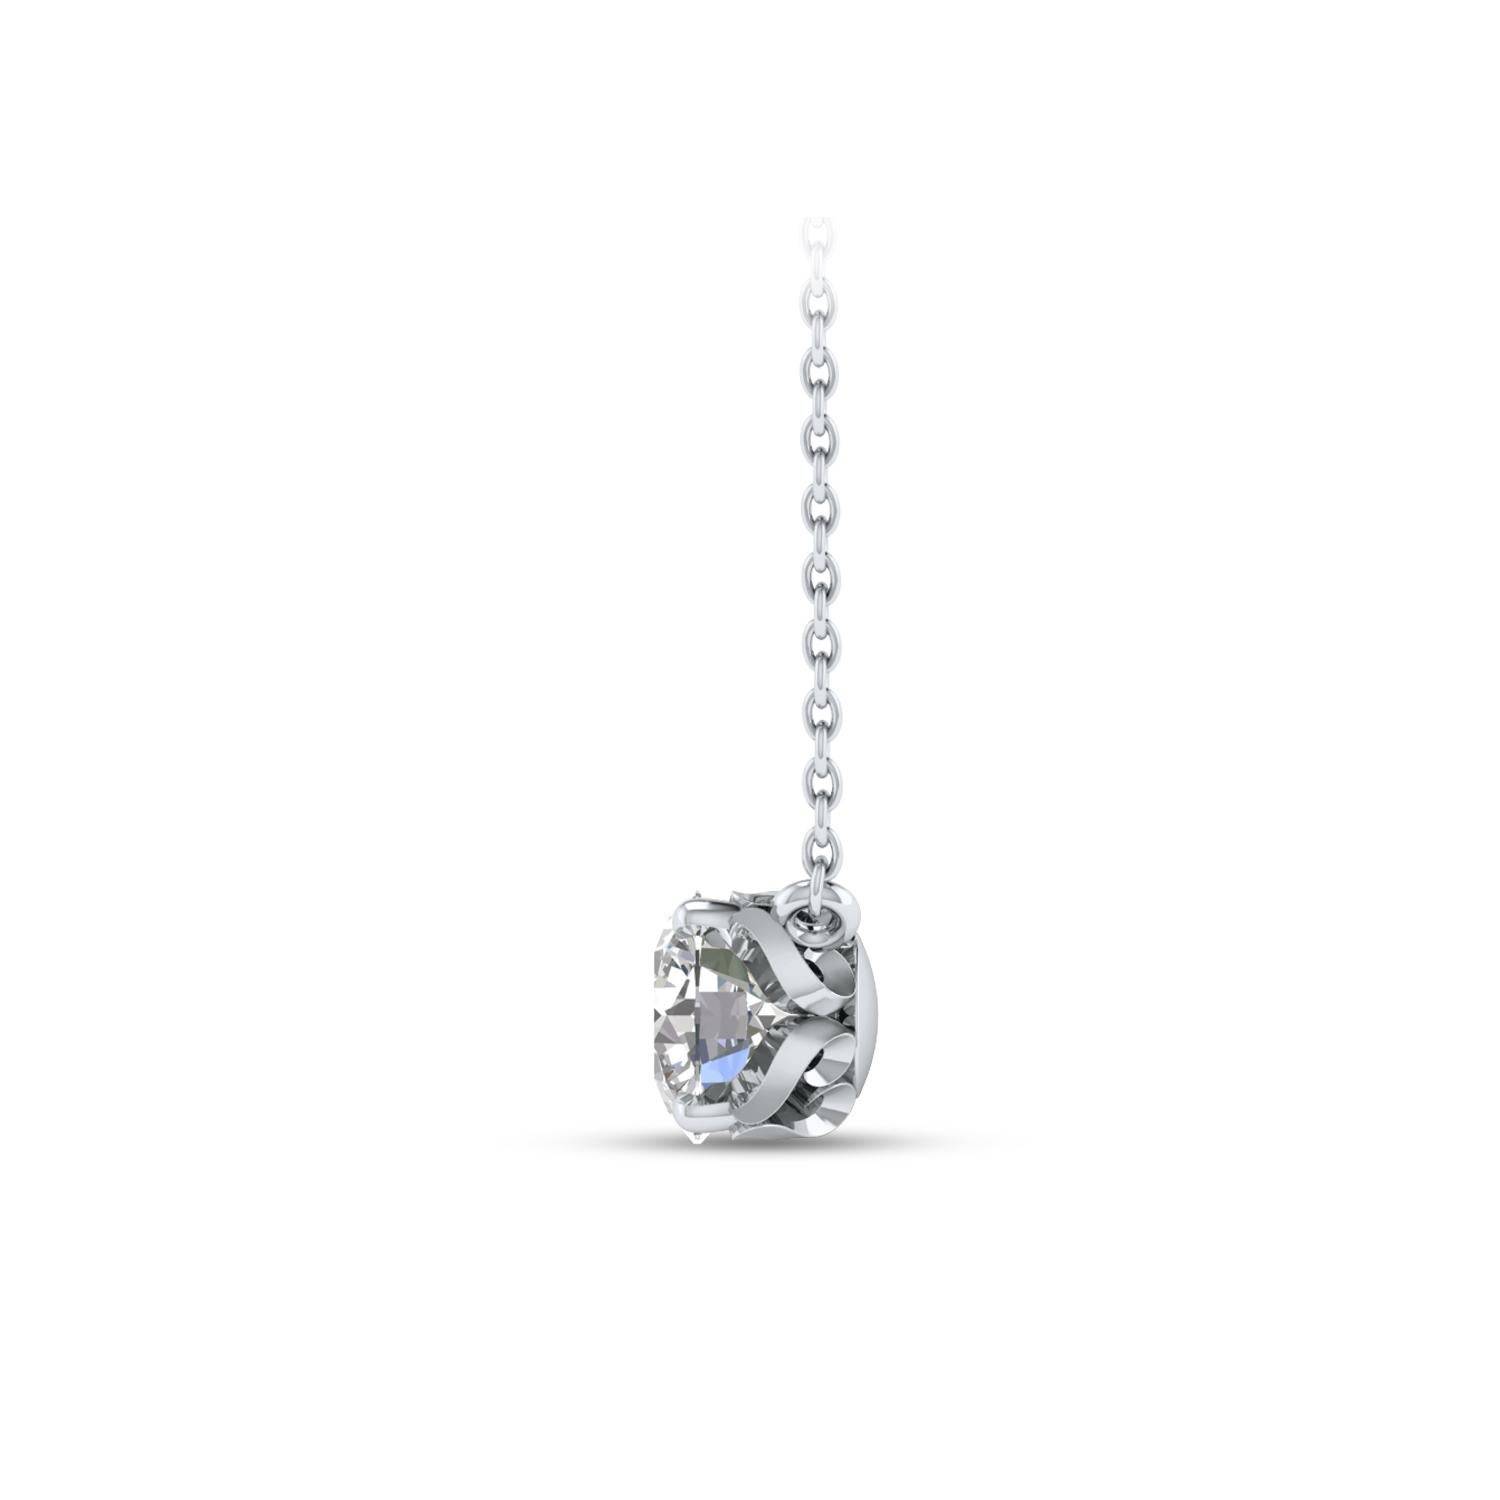 Contemporary Harakh GIA Certified 0.33 Carat Solitaire Diamond Pendant Necklace in 18 Kt Gold